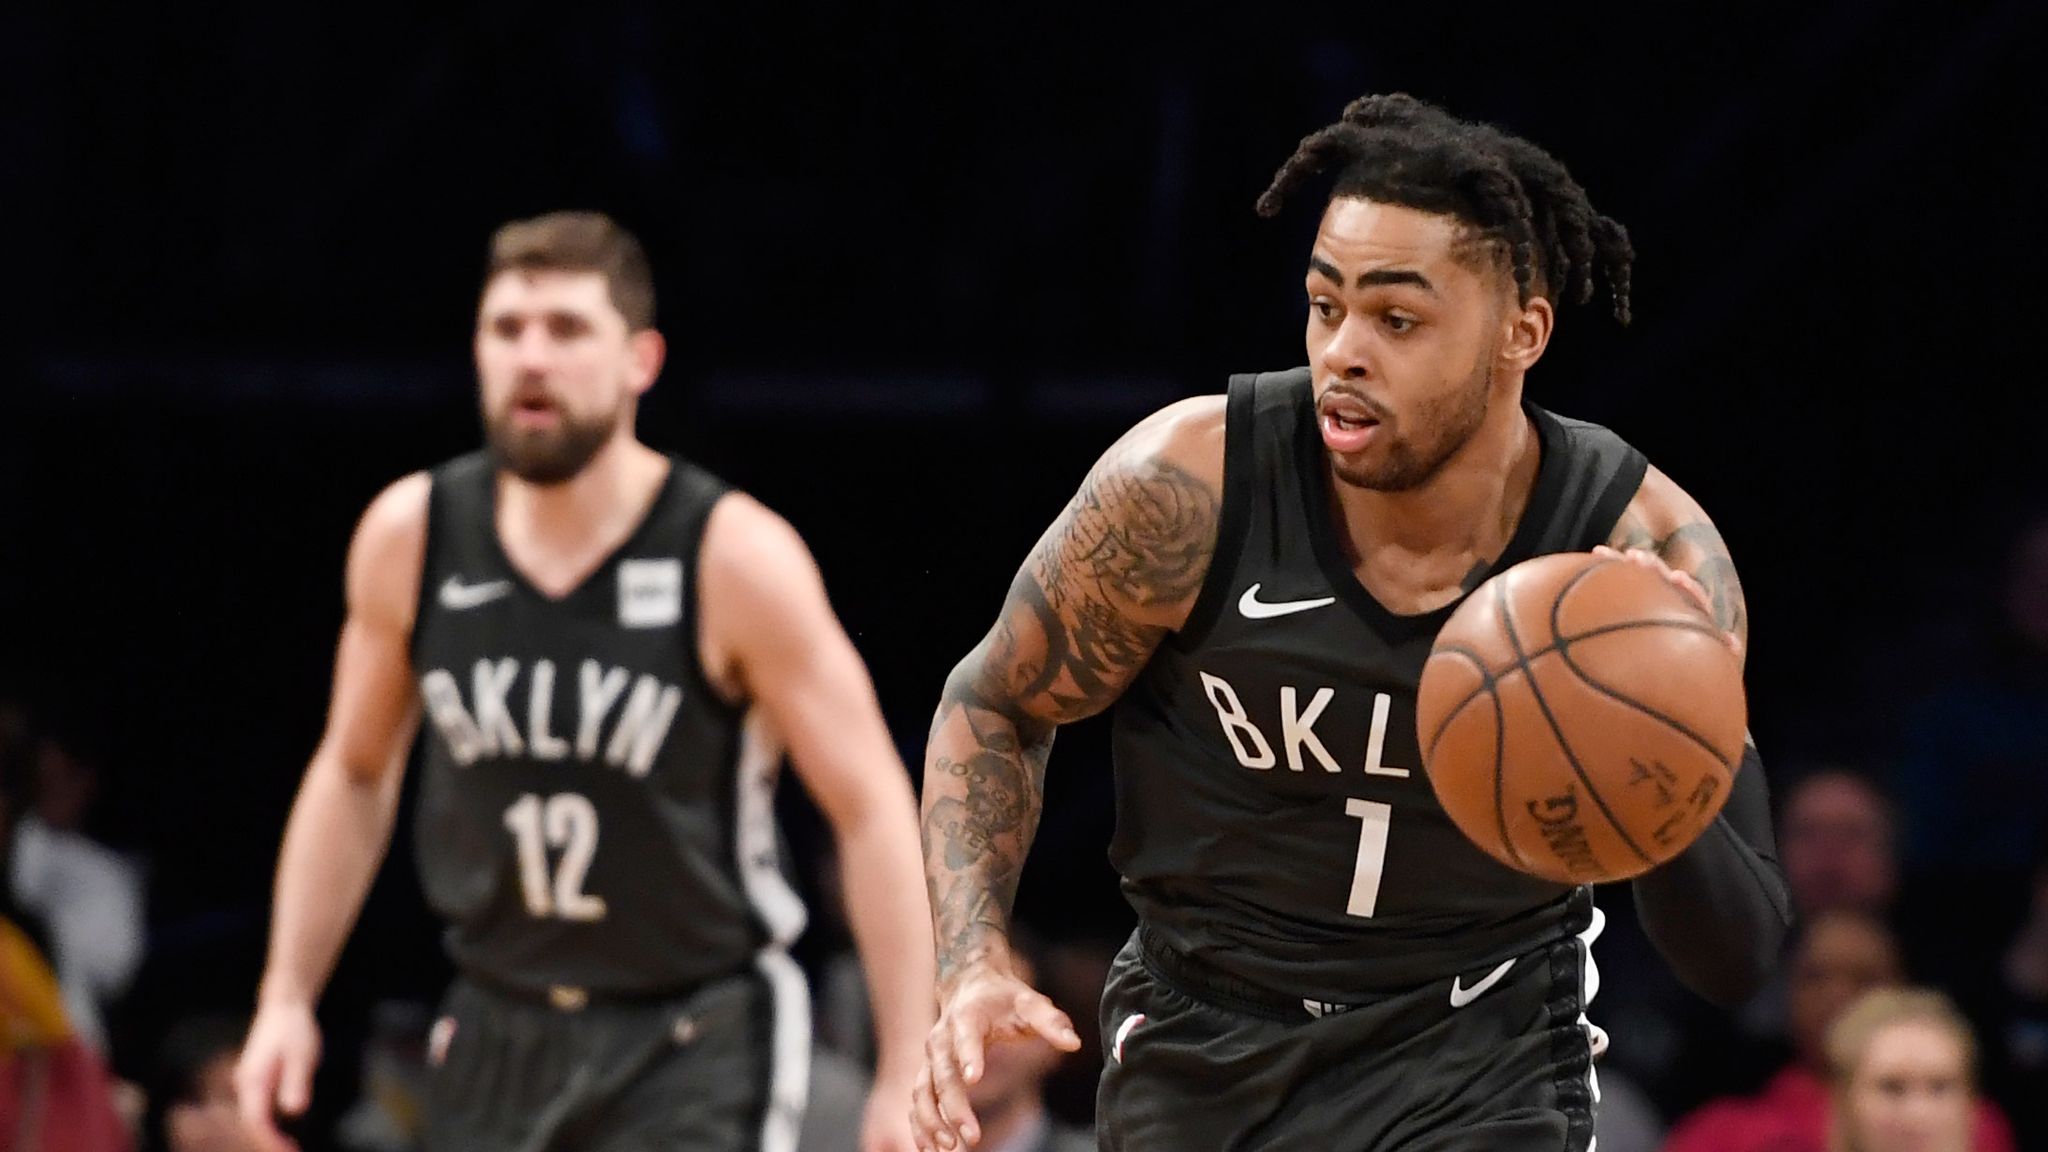 Nets players excited to play with D'Angelo Russell, playmaker - NetsDaily